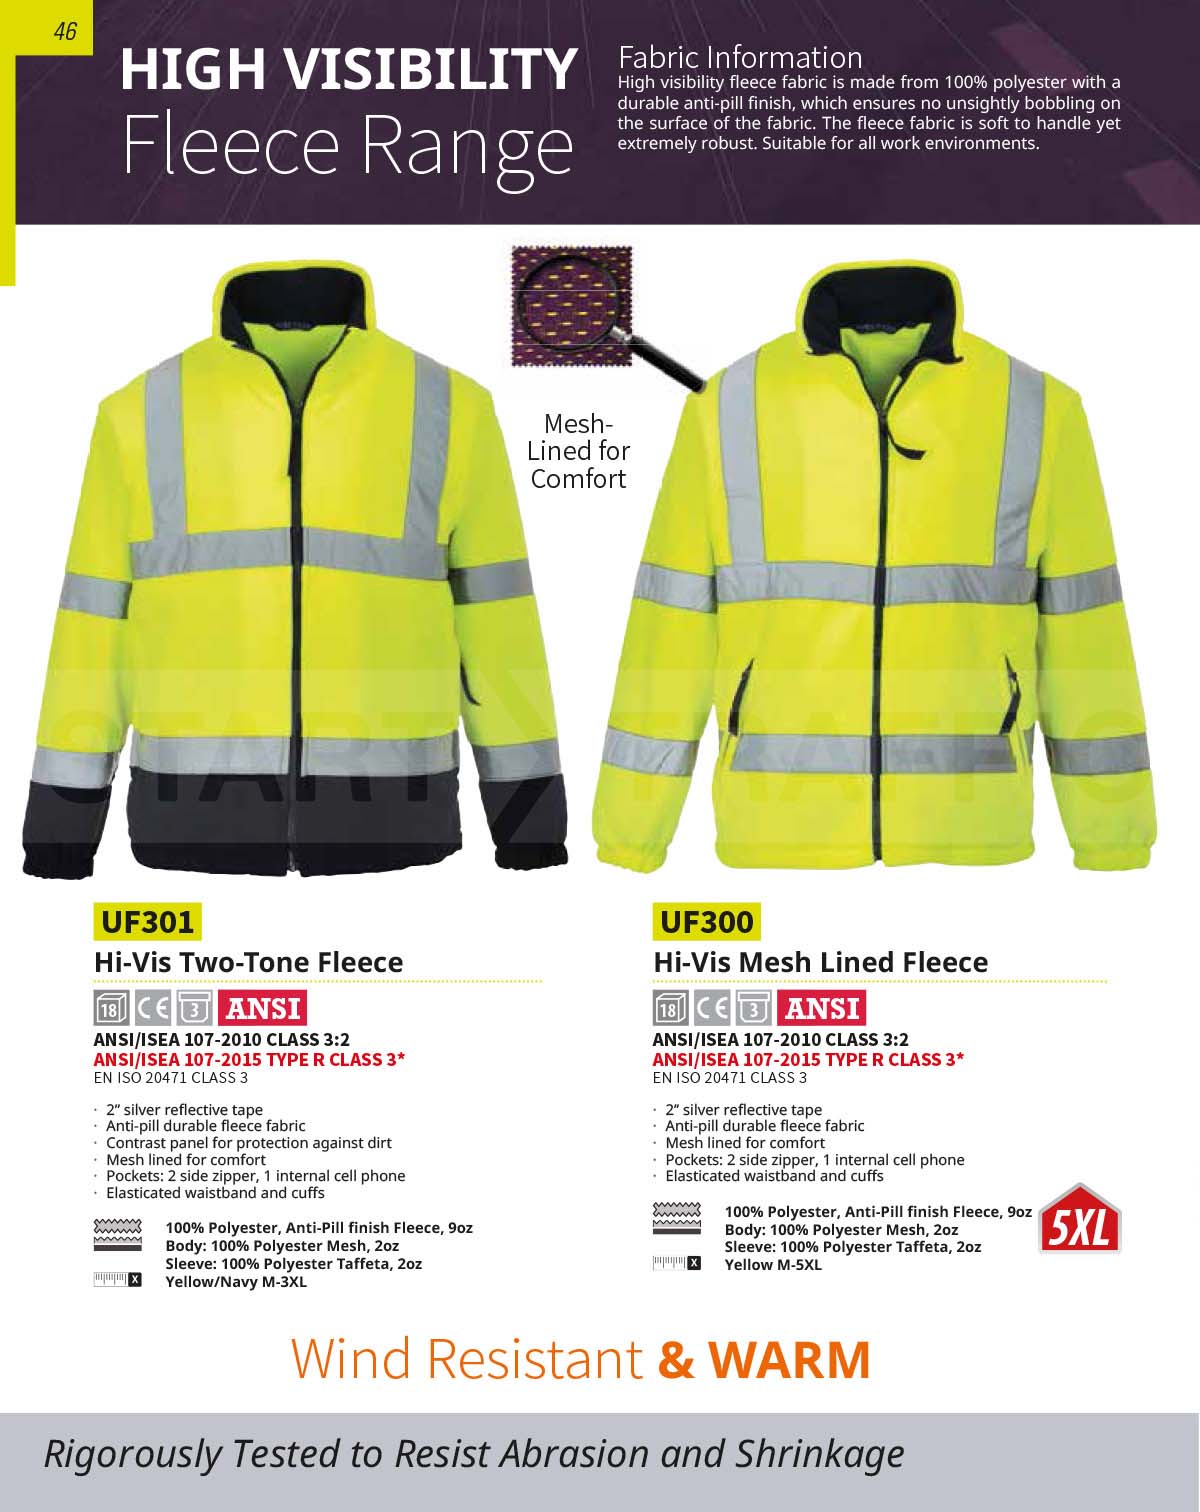 UF301 Two-Tone High Visibility Fleece